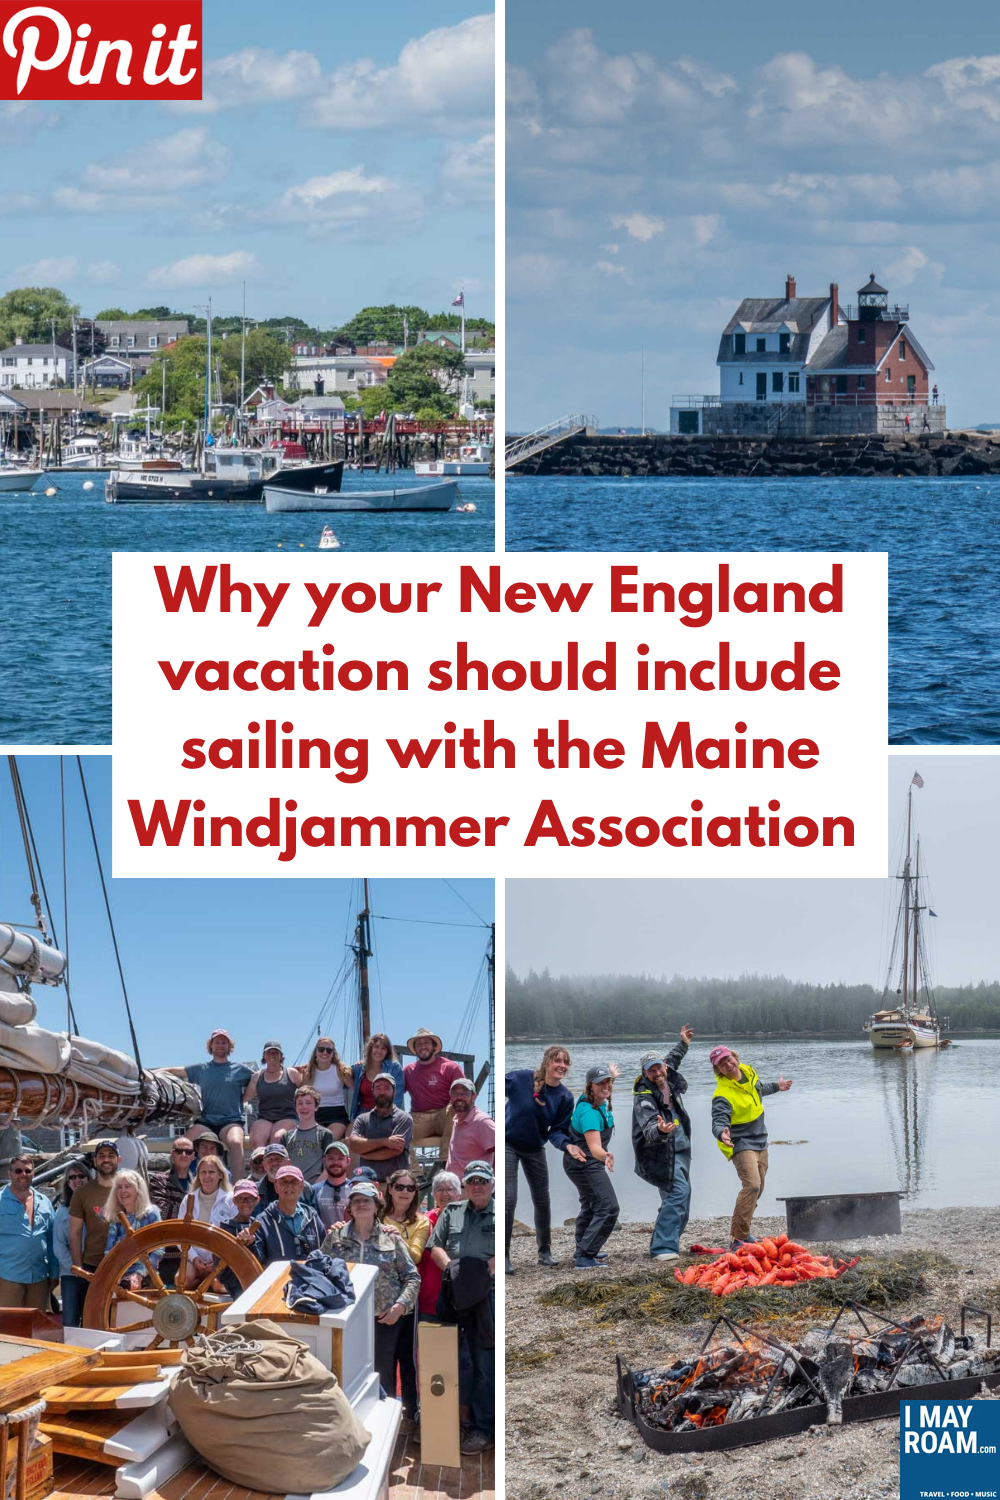 Why your New England vacation should include sailing with the Maine Windjammer Association